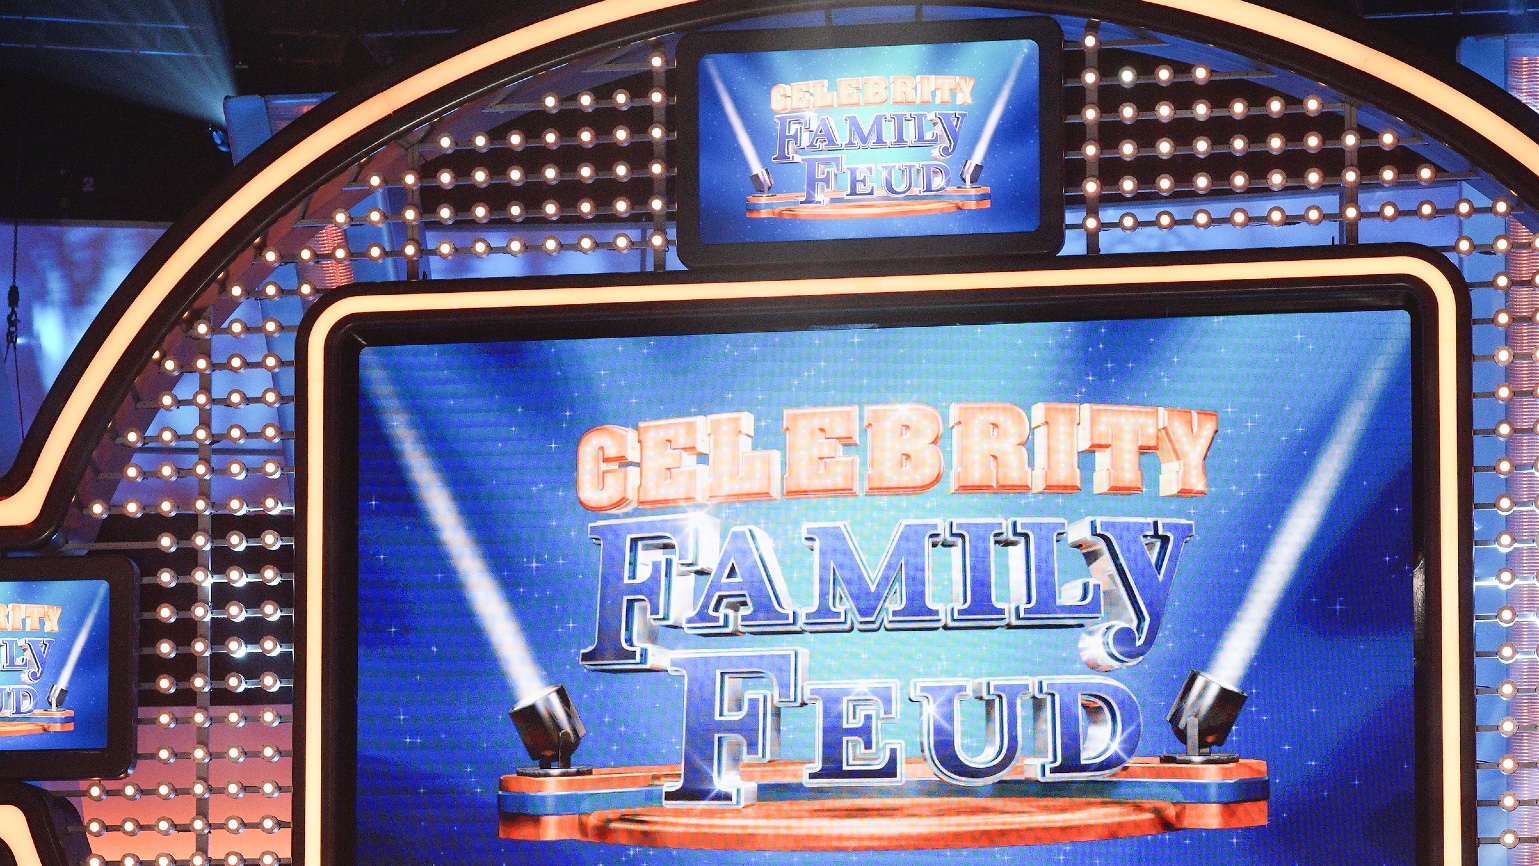 A man accused of killing his wife gave an eerie response to a marriage-related question on "Family Feud."